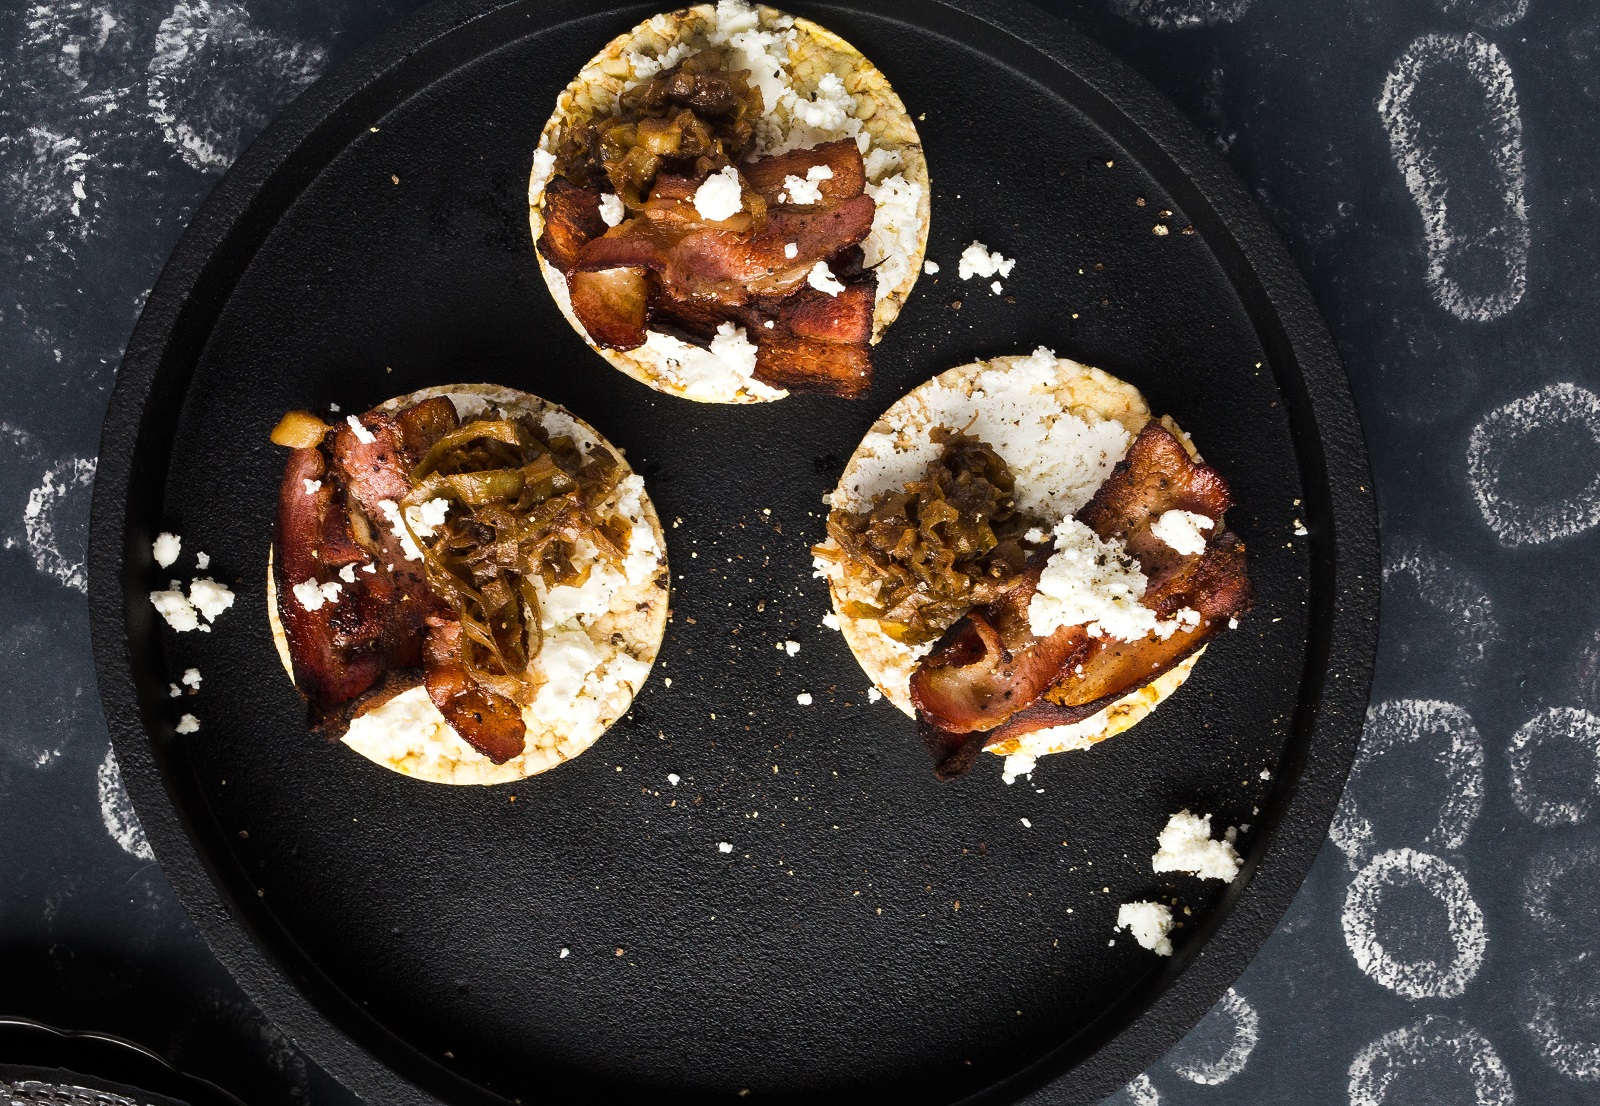 caramelised leek, bacon & goats cheese on Corn Thins for dinner